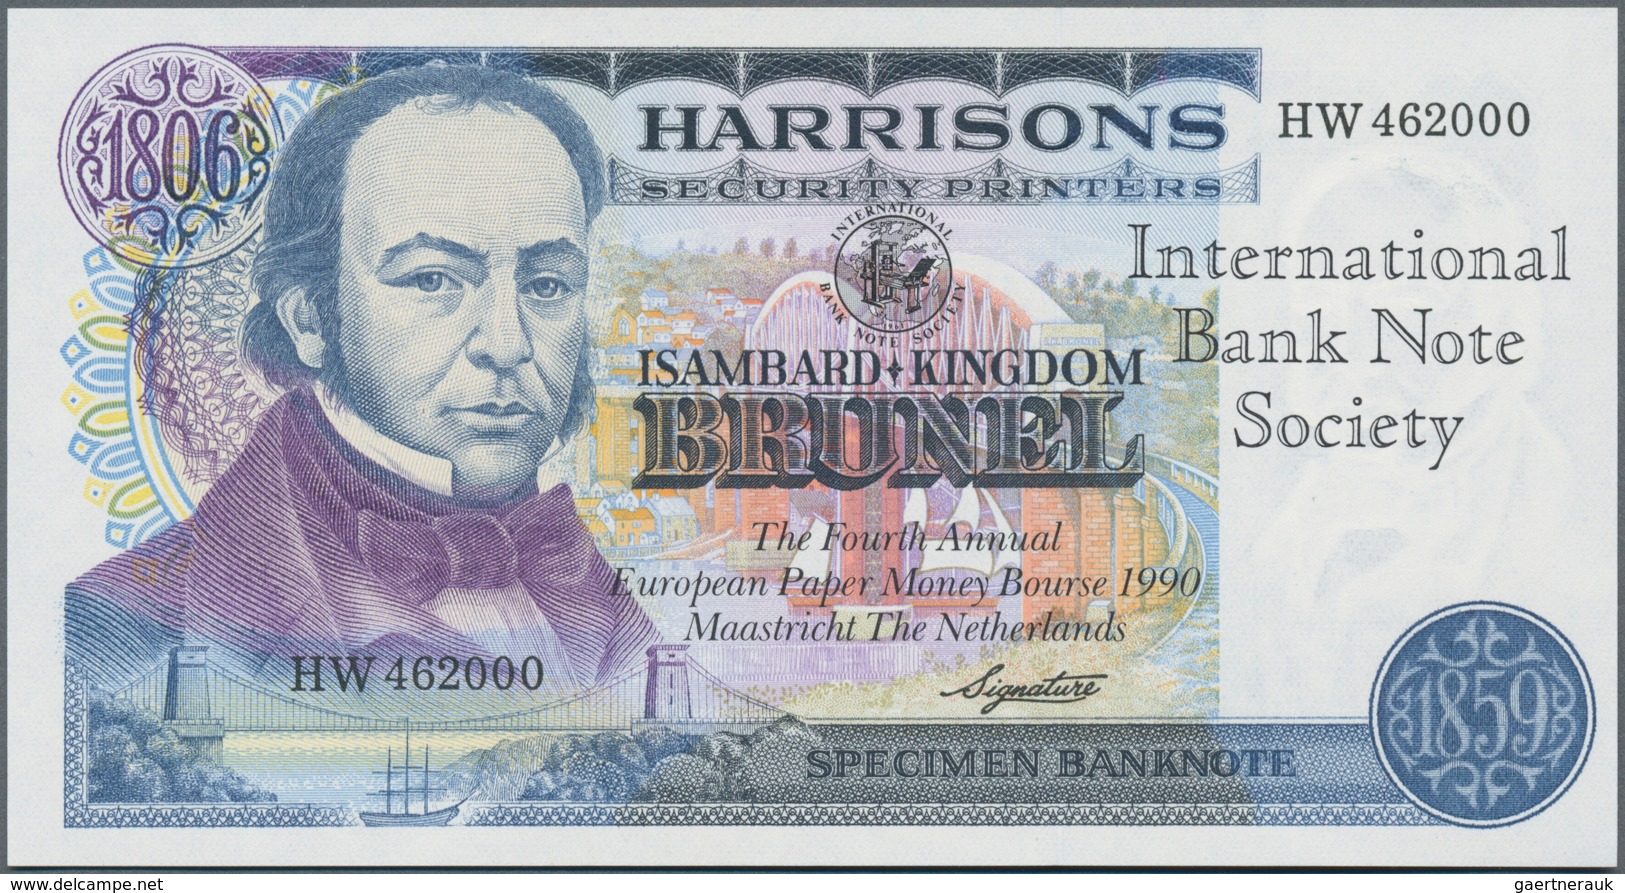 Testbanknoten: Huge Lot With 56 Pcs. Testnotes, Advertising Notes And Watermark Paper, Comprising Fo - Specimen